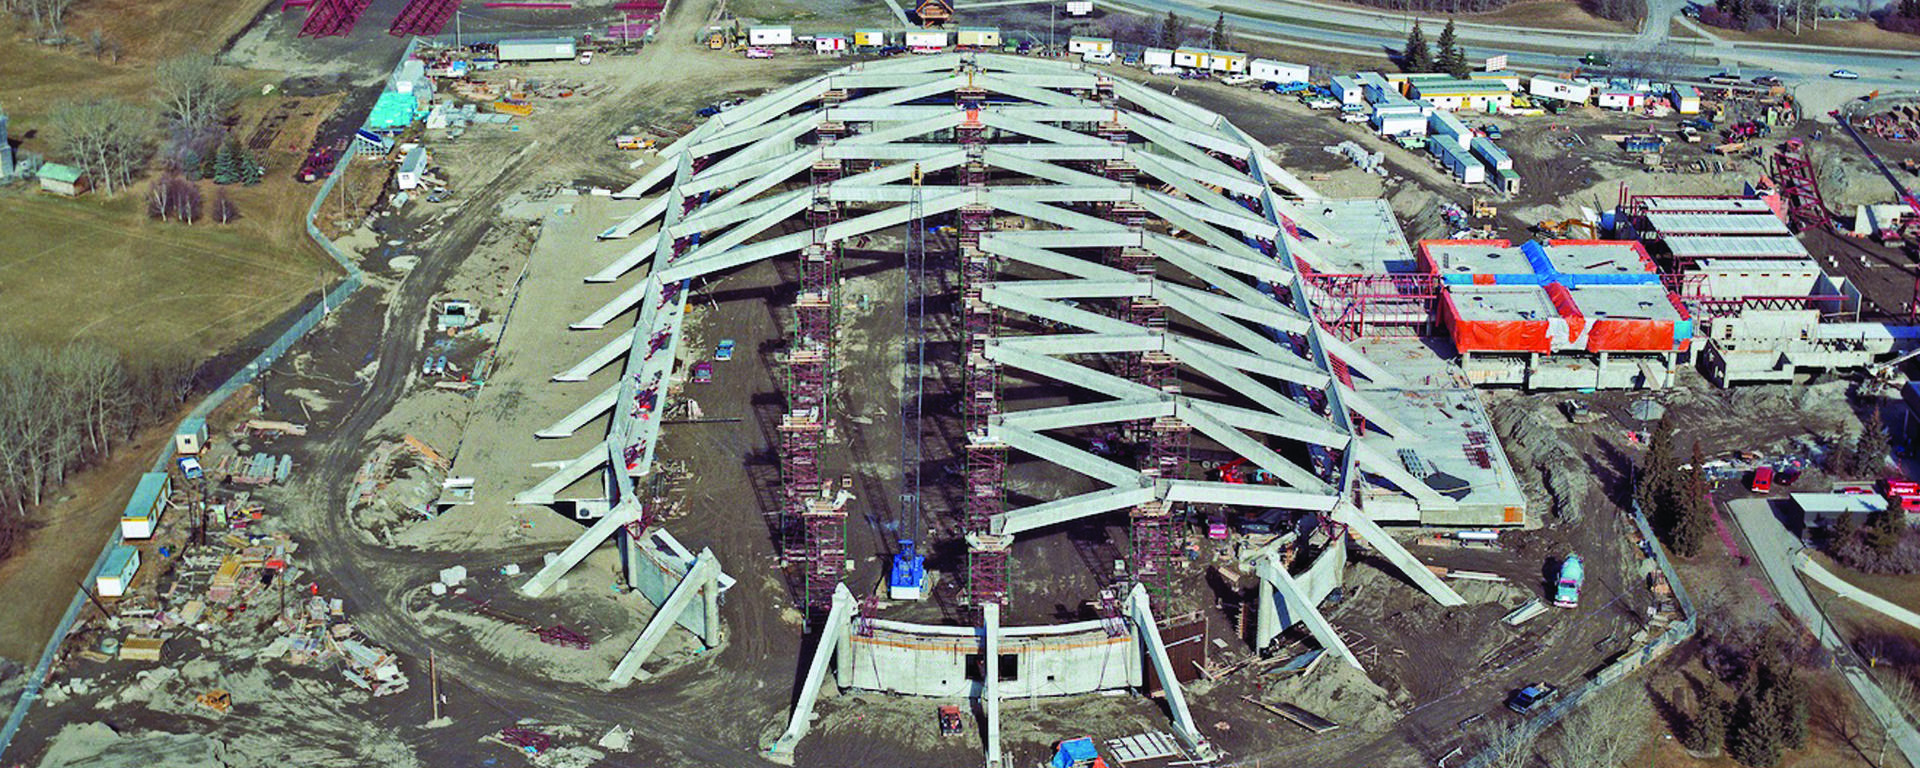 Oval Construction